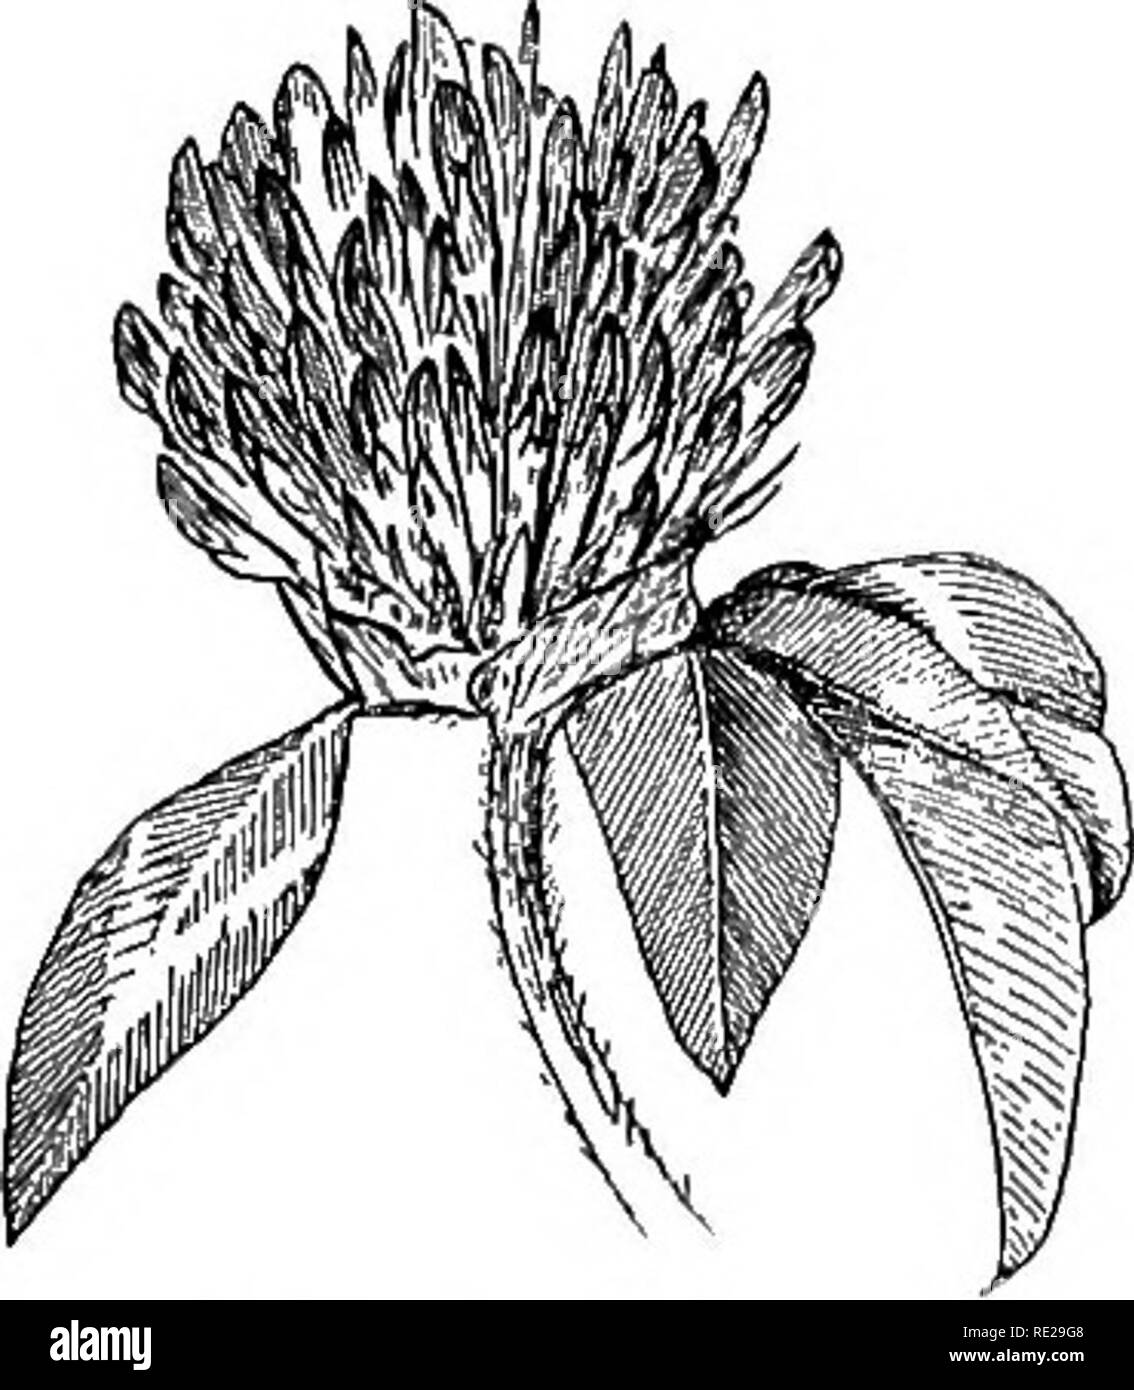 . Botany all the year round; a practical text-book for schools. Botany. I go BUDS AND BRANCHES which is merely a compound raceme, the pedicels of which are branched one or more times. 271. A Spike (Fig. 354) is a raceme with the flowers sessile and more or less crowded together, as in the plantain, smartweed, wheat, barley, etc. A form of spike more common in early spring is the 272. Ament, or Catkin, of which we have abundant examples in the pendent scaly inflorescence of the willow, oak, poplar, and most of our common forest trees (Fig. 355). A sessile corymb or umbel gives rise to 354. â A  Stock Photo